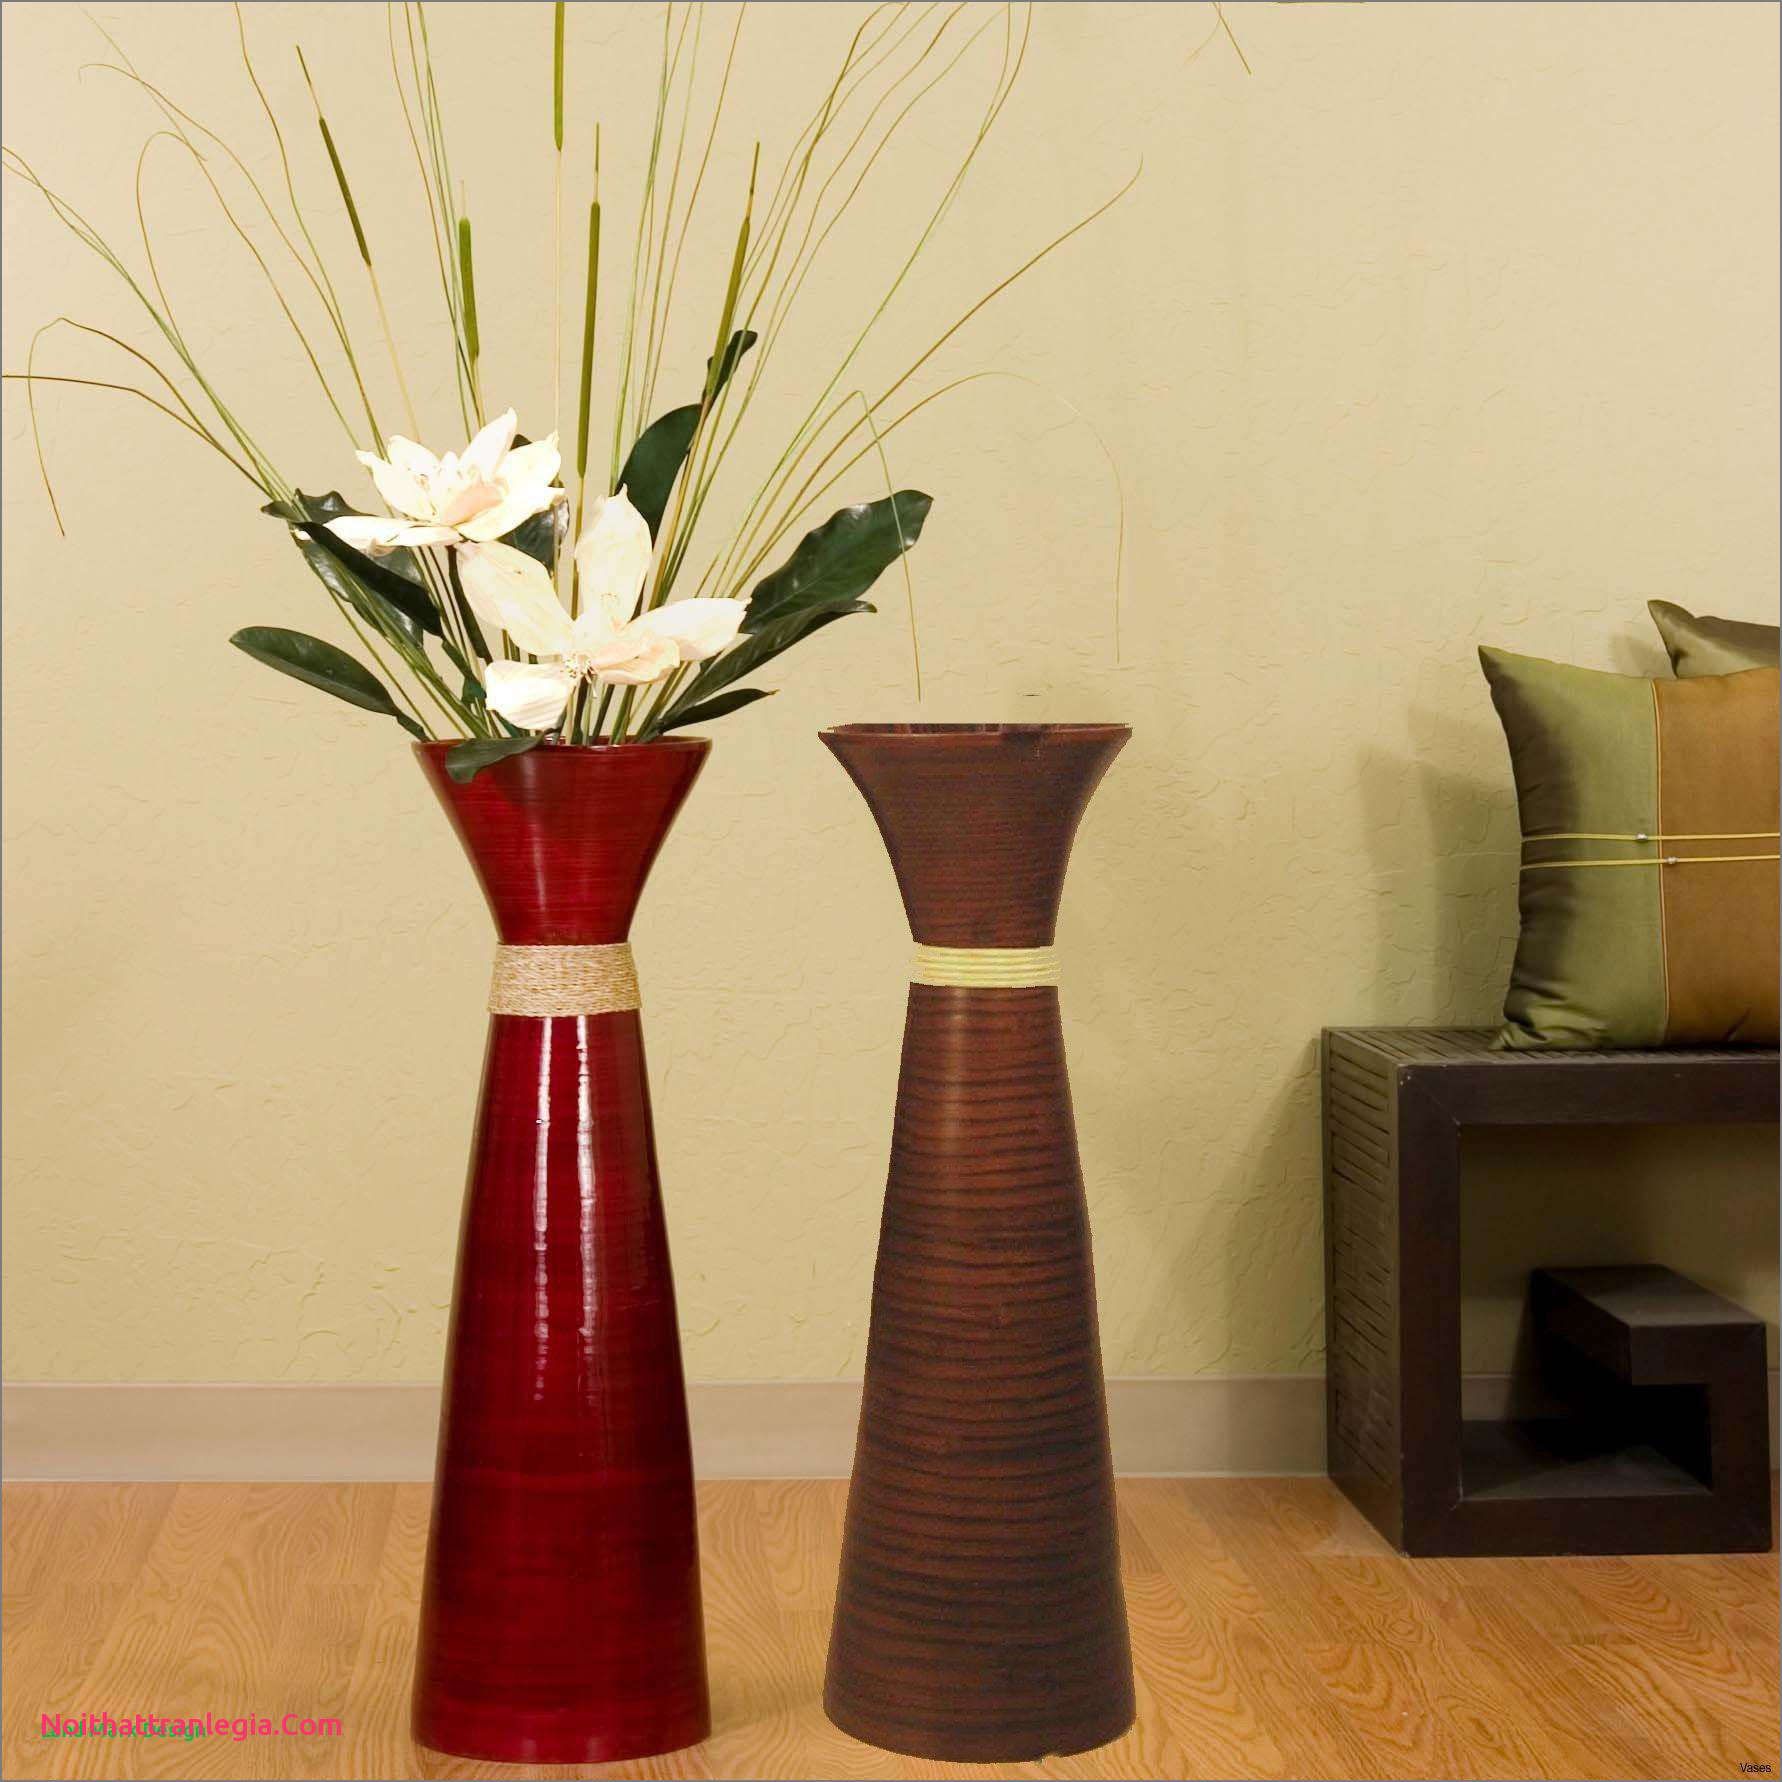 12 Stylish Large Floor Vase with Artificial Flowers 2024 free download large floor vase with artificial flowers of 20 large floor vase nz noithattranlegia vases design pertaining to full size of living room wooden vase best of vases flower floor vase with flowe